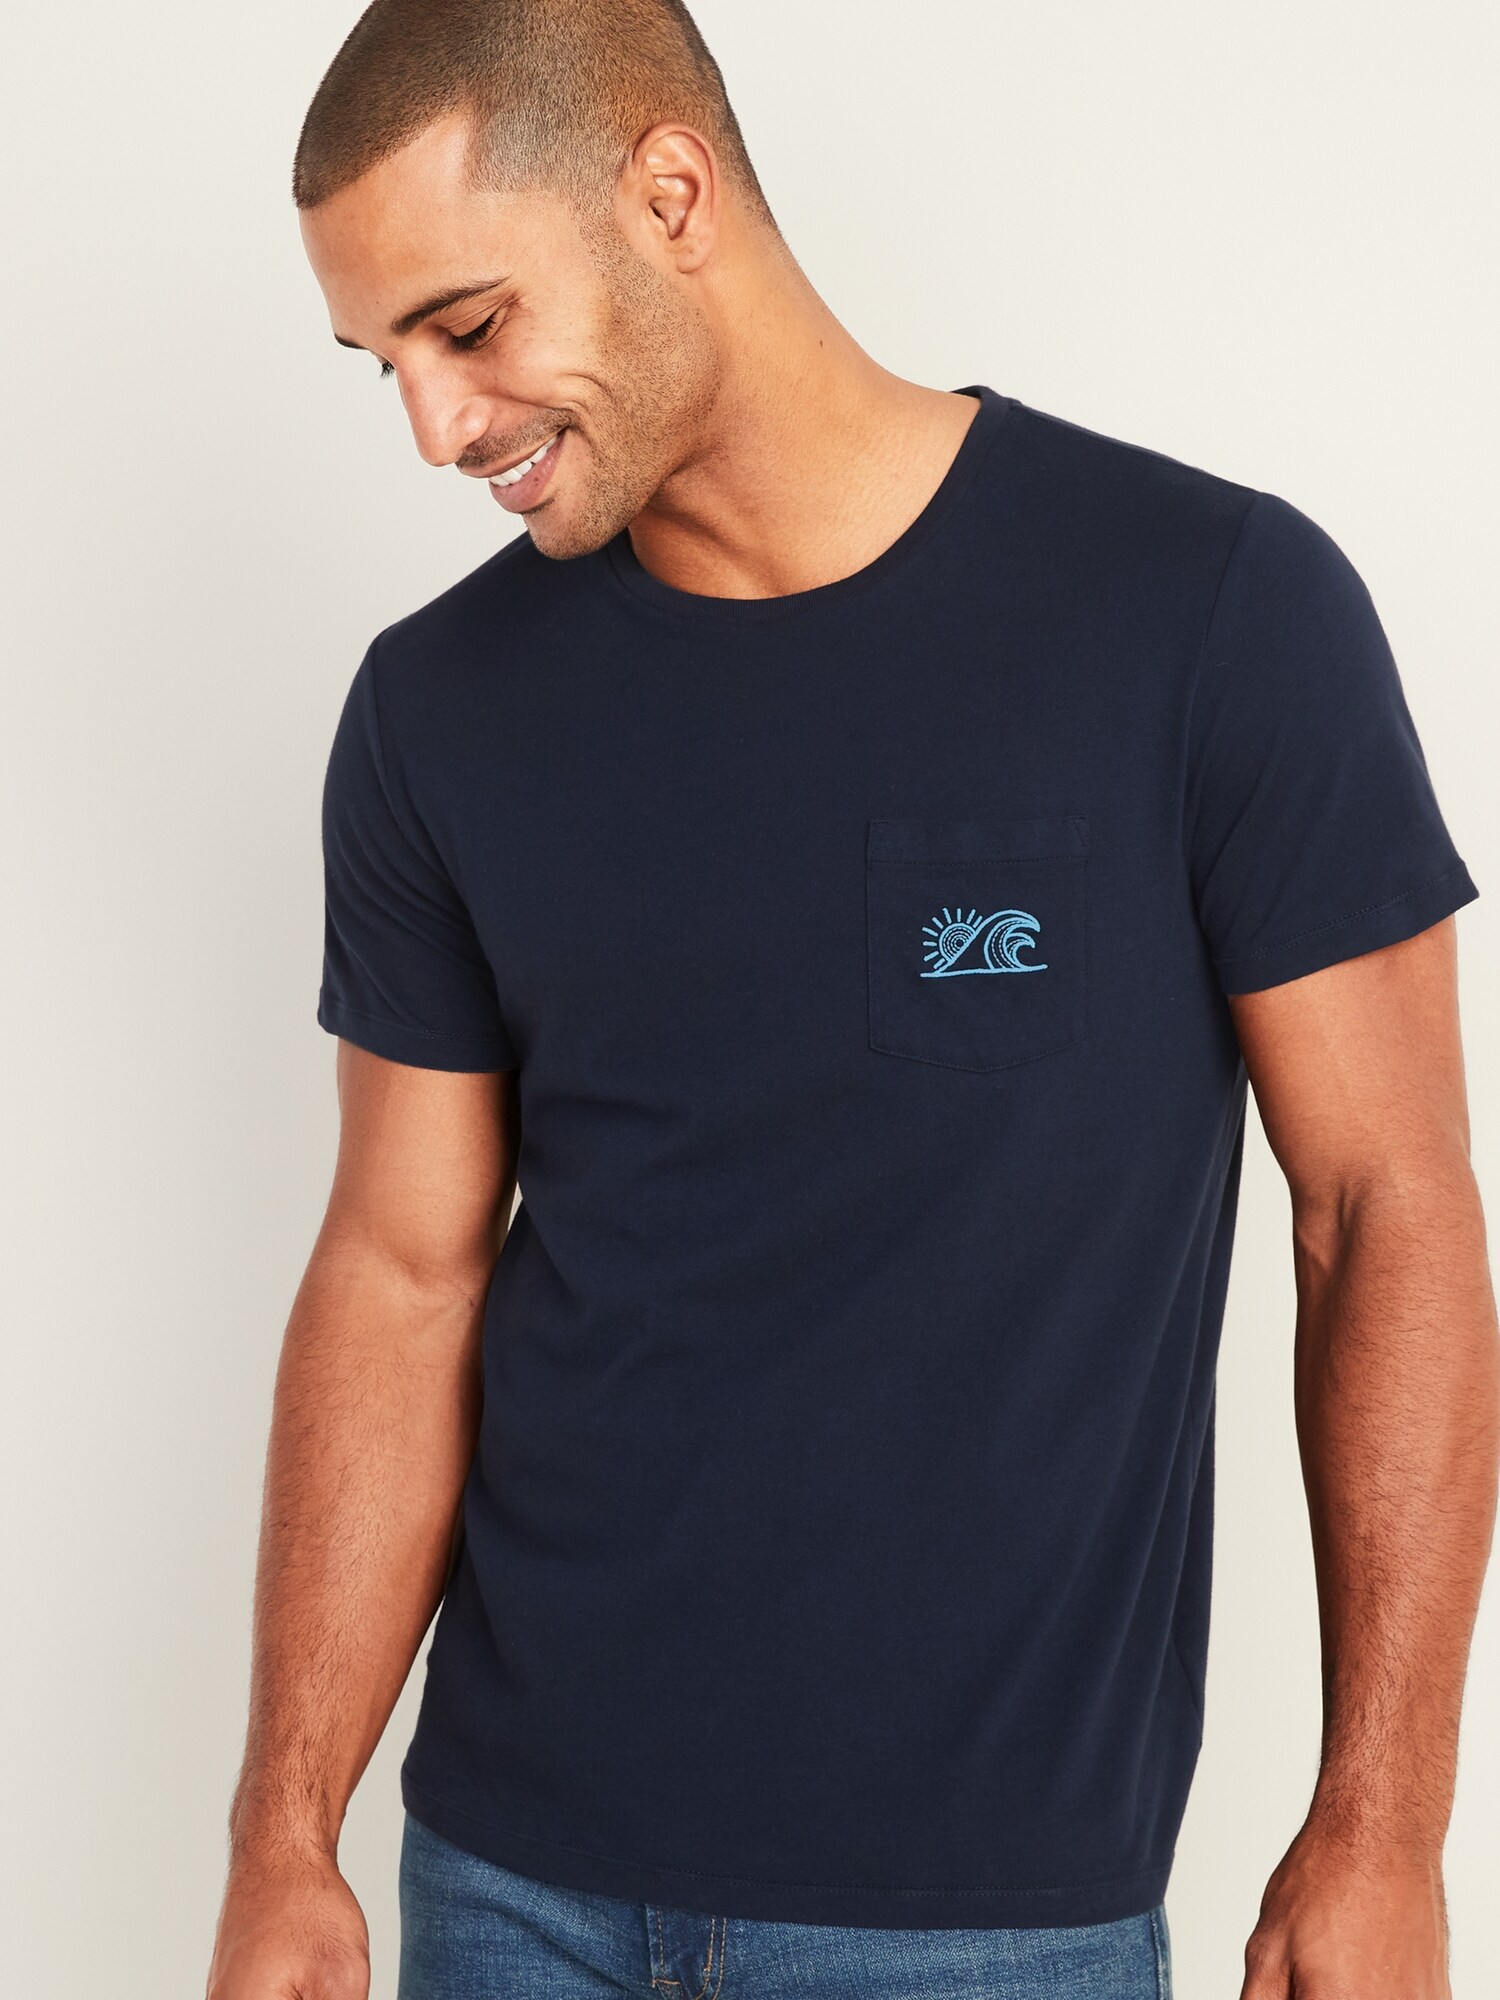 More Motion Graphic Tee Navy Blue